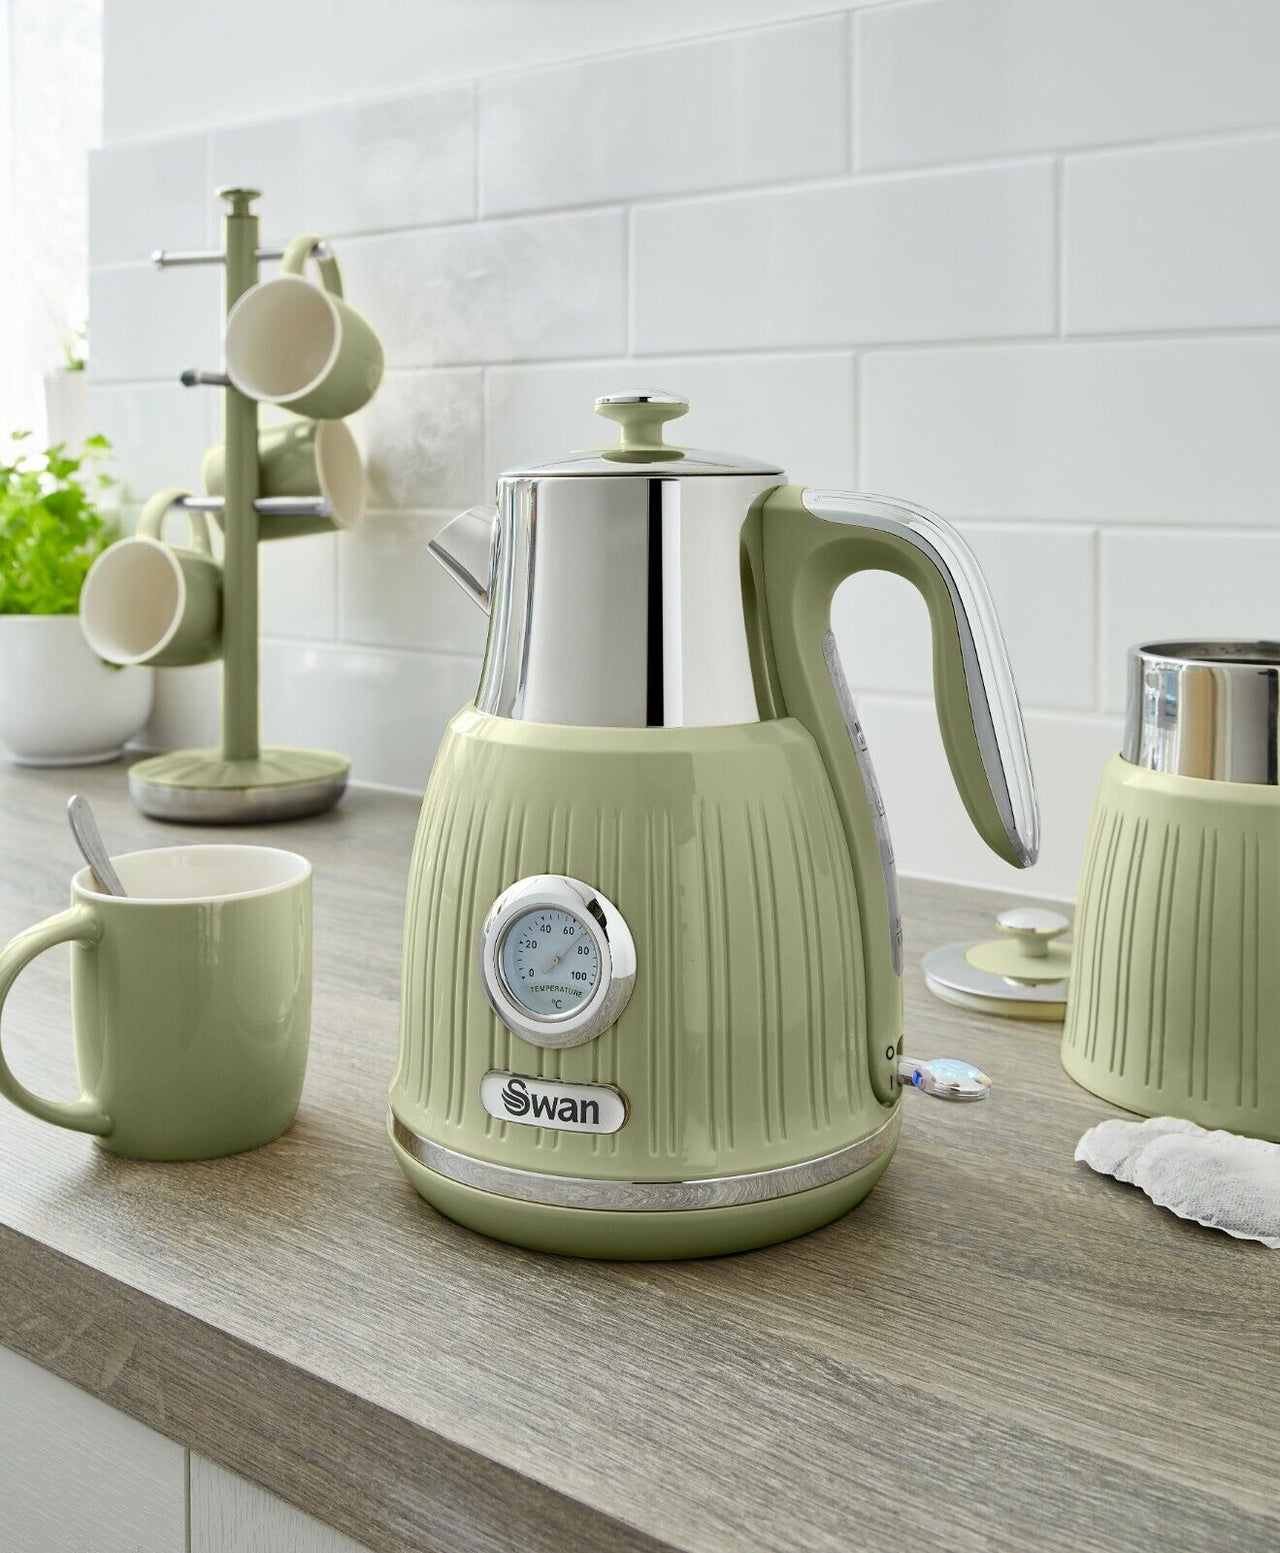 SWAN Retro Green Dial Kettle 2 Slice Toaster Breadbin Canisters Kitchen Set of 6